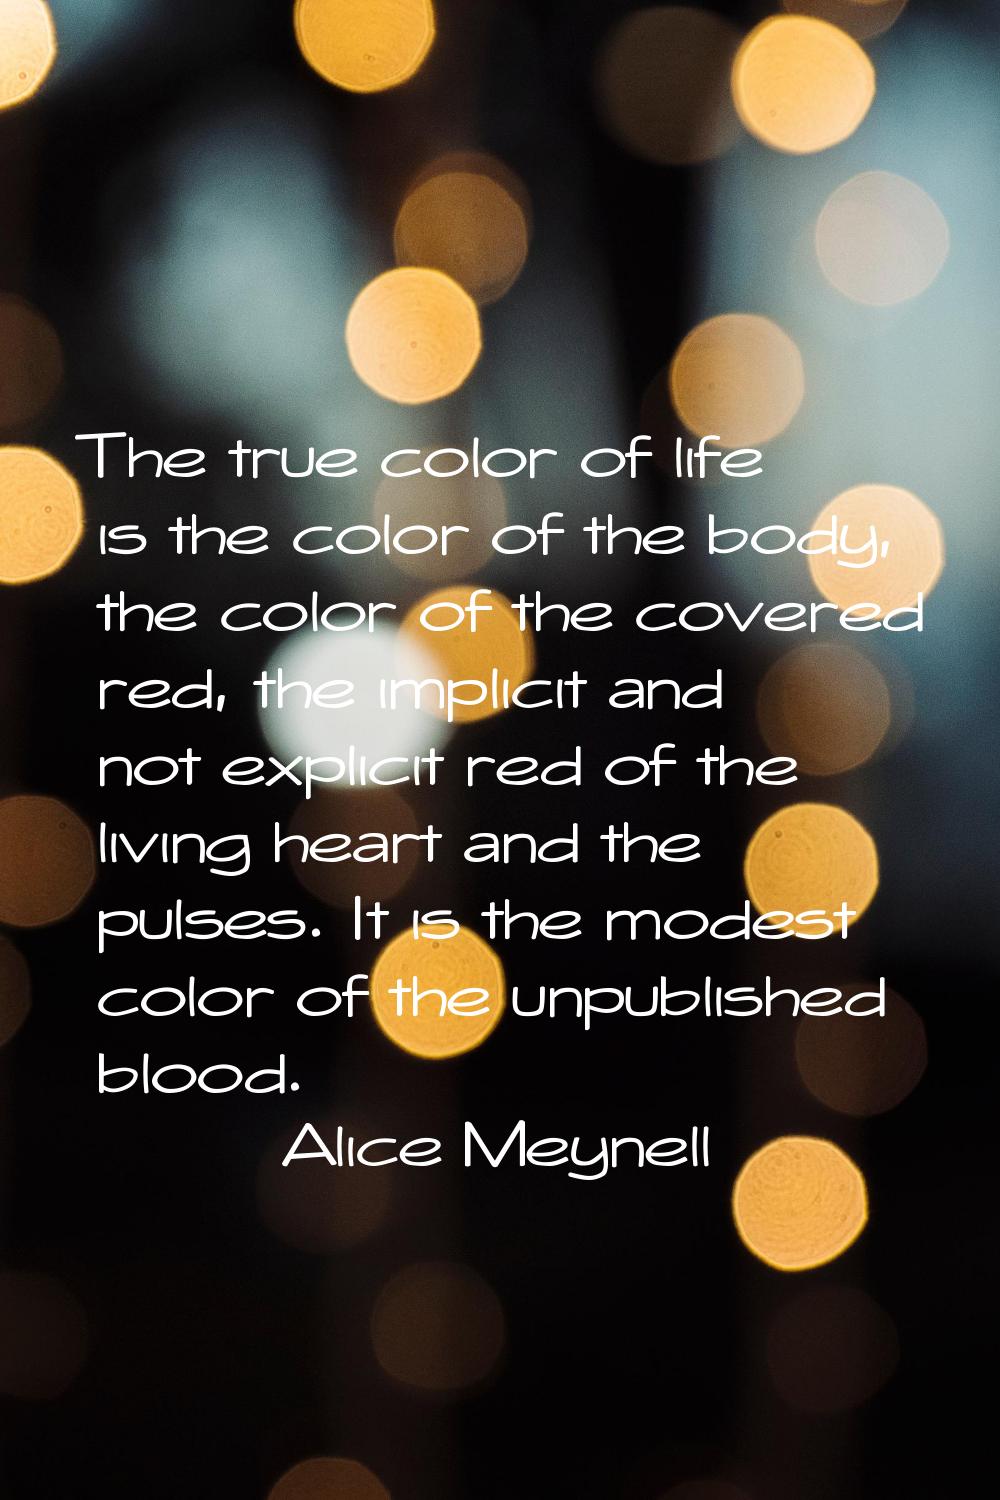 The true color of life is the color of the body, the color of the covered red, the implicit and not